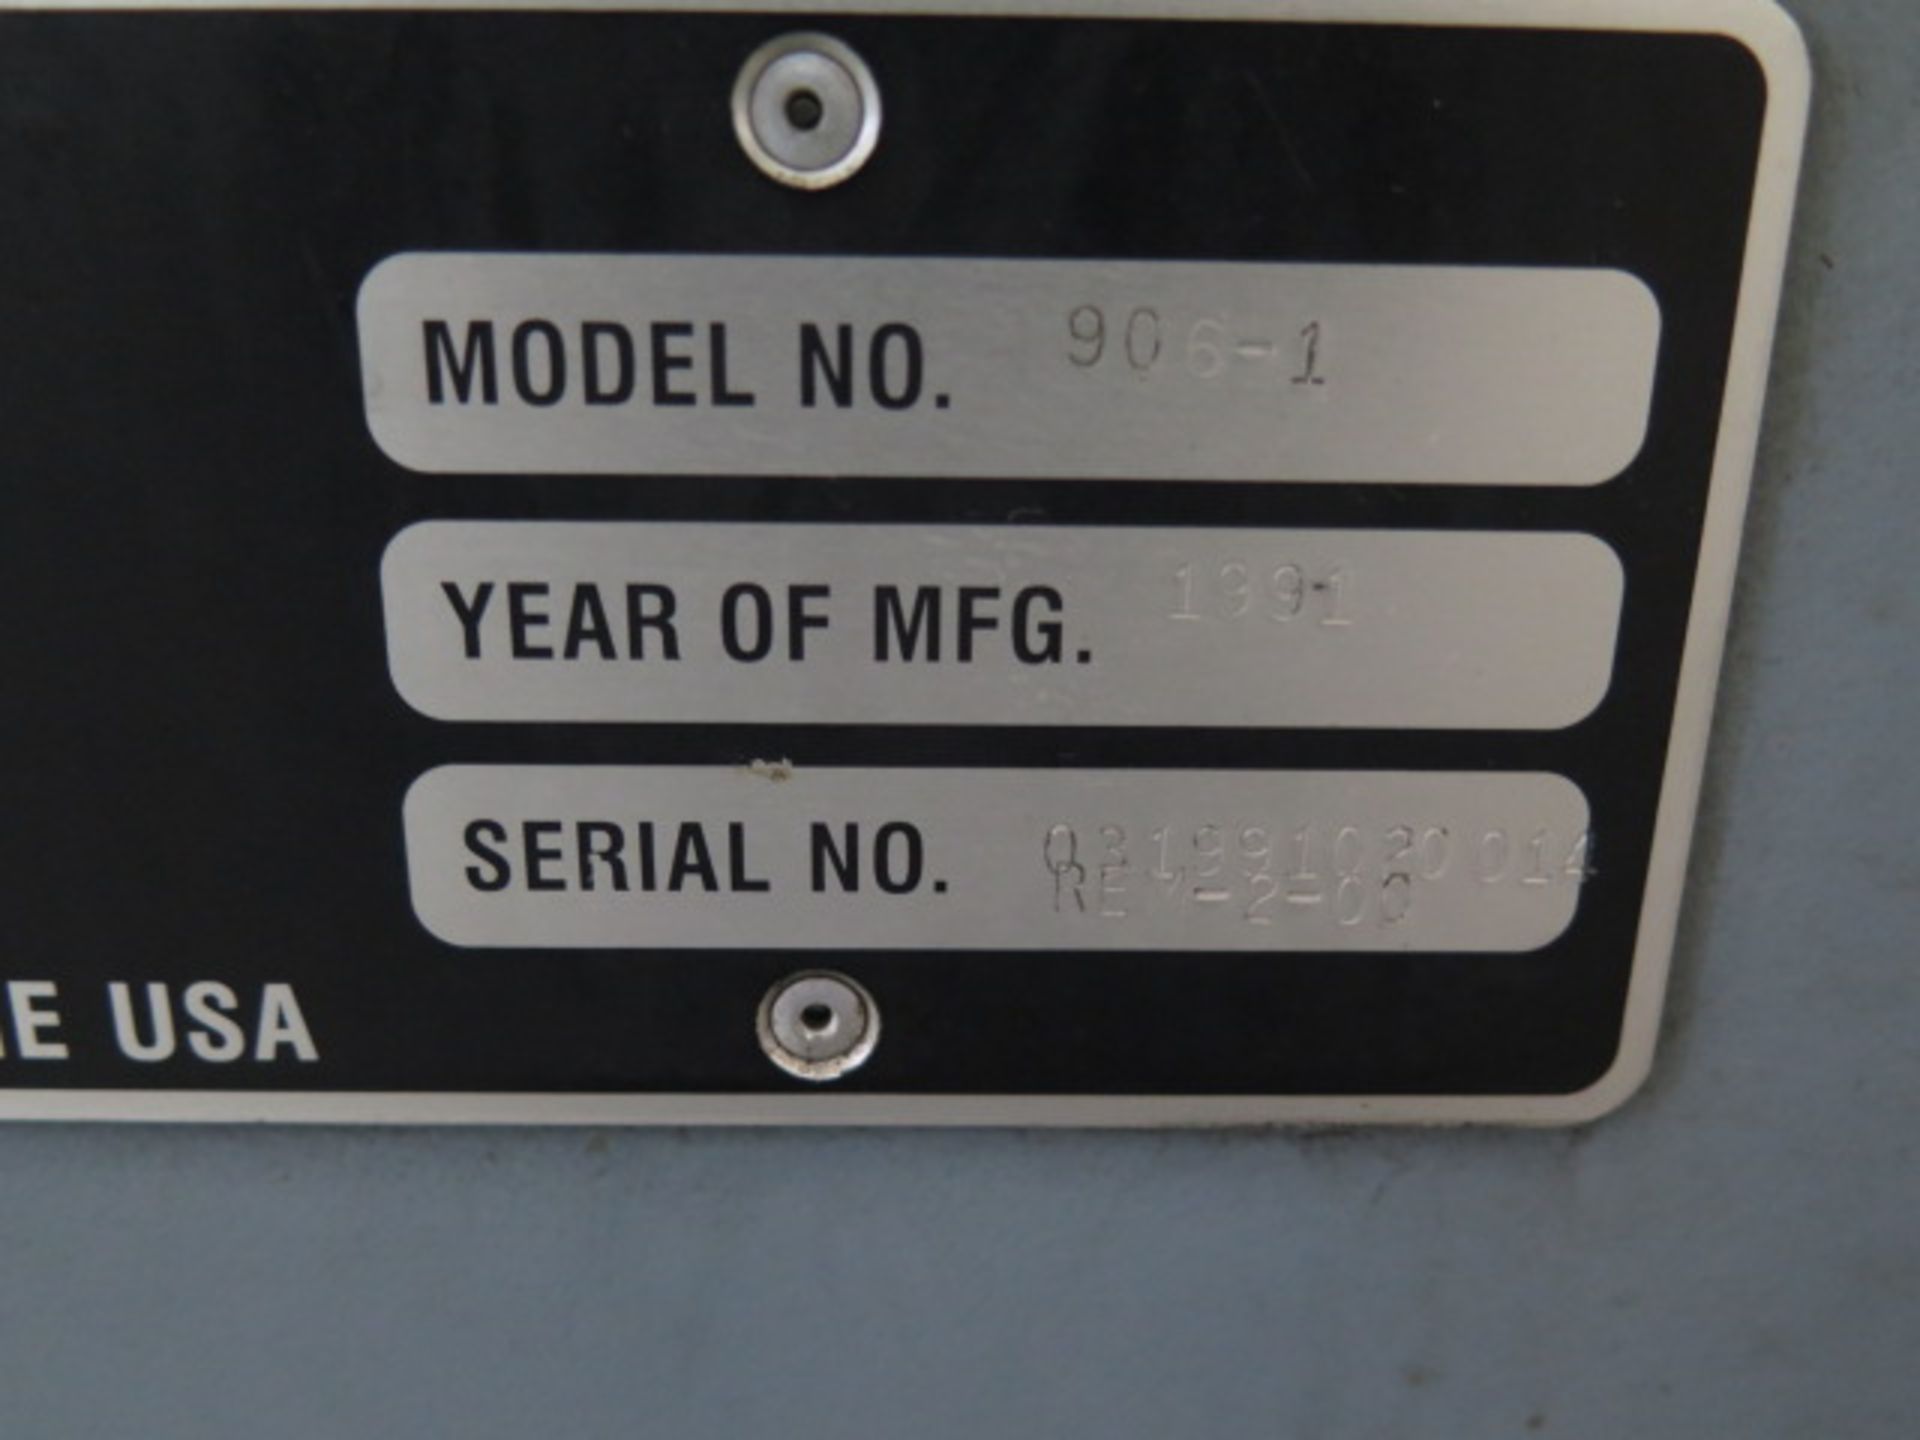 (2000 Remanufactured) Fadal VMC4020 CNC Vertical Machining Center s/n 031991020014, SOLD AS IS - Image 20 of 20